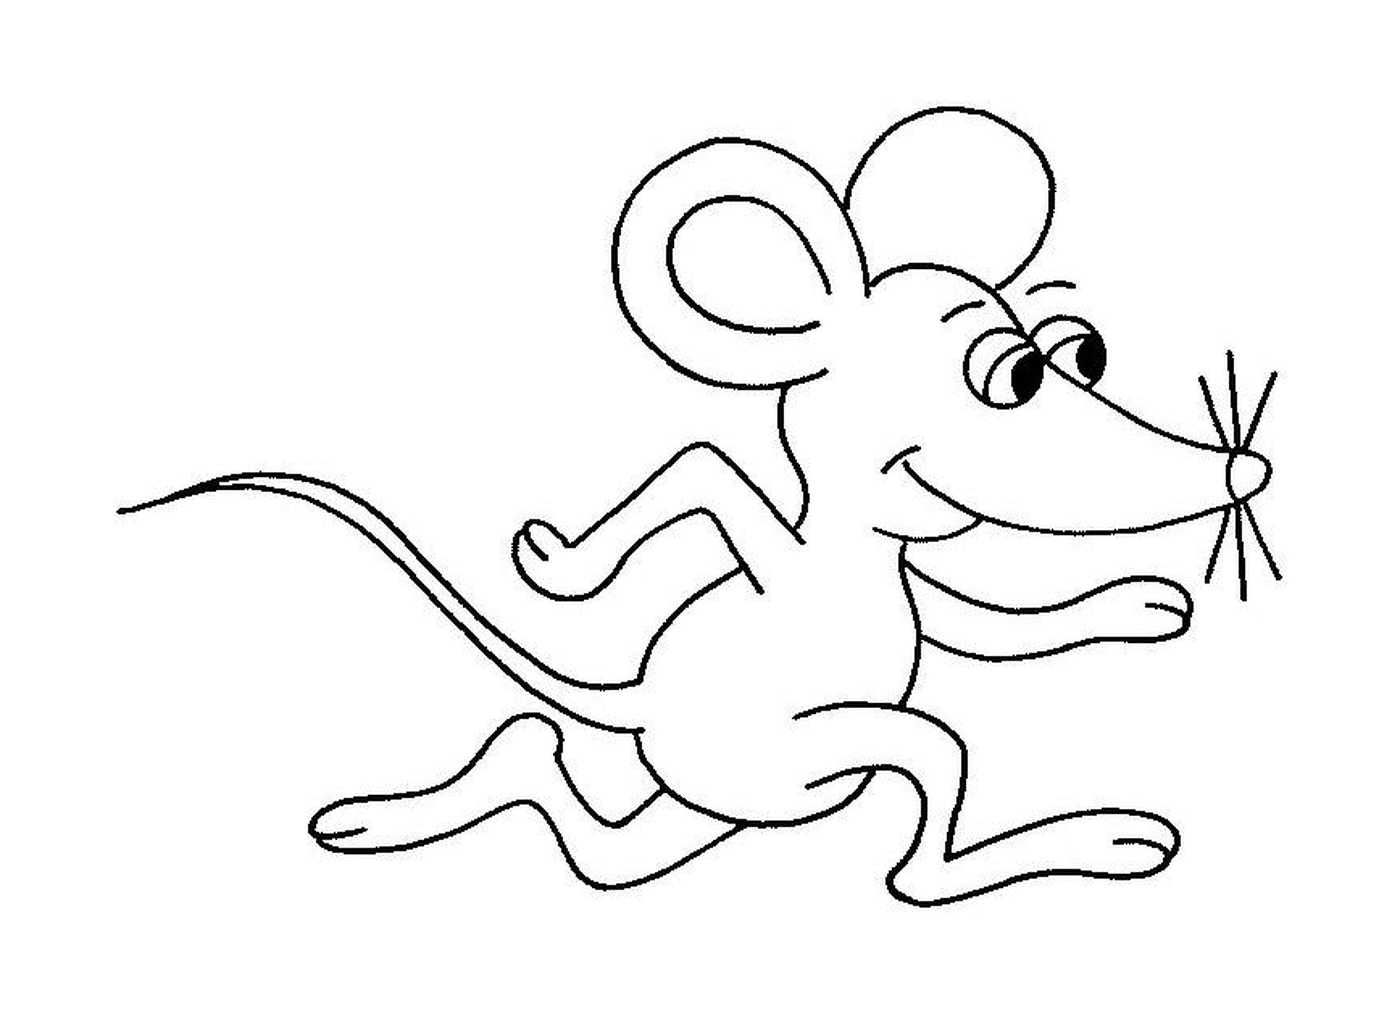  A running mouse 